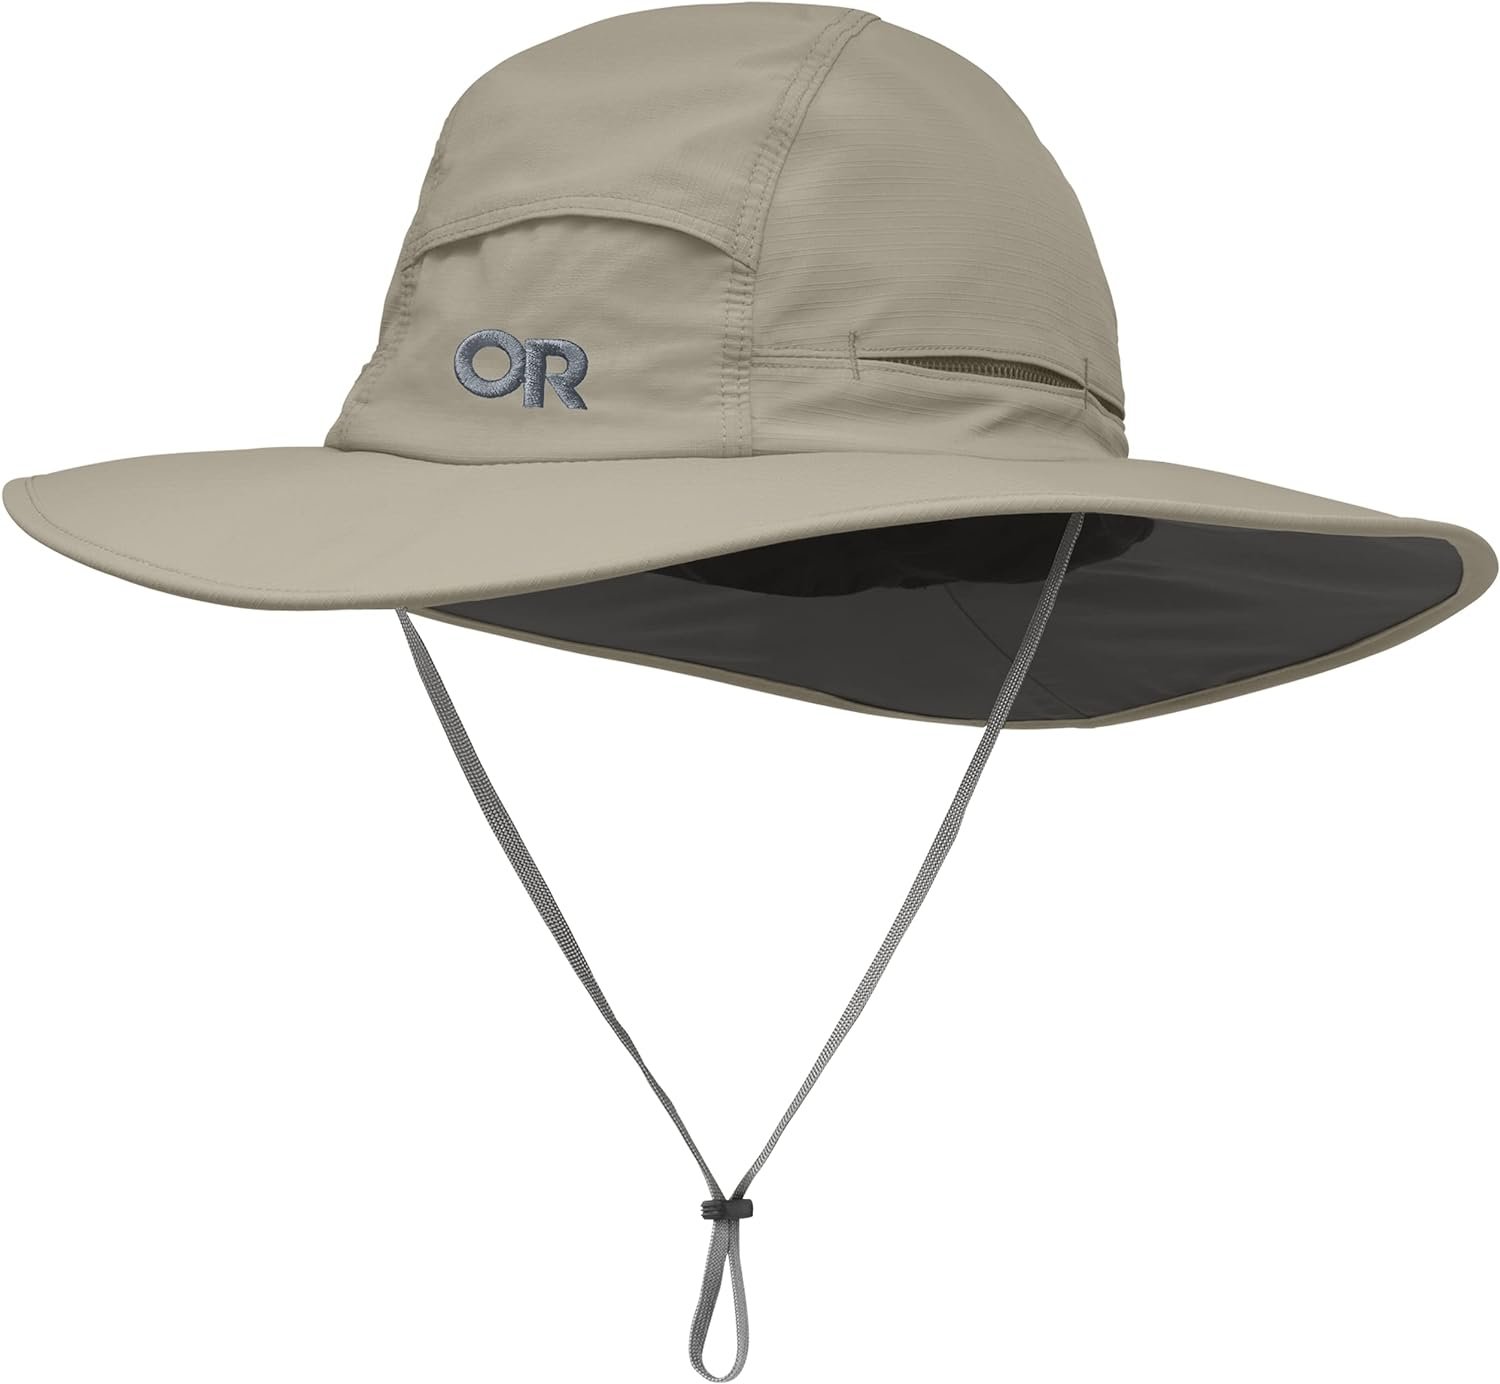 Sombriolet Sun Hat - Breathable Lightweight Wicking Protection